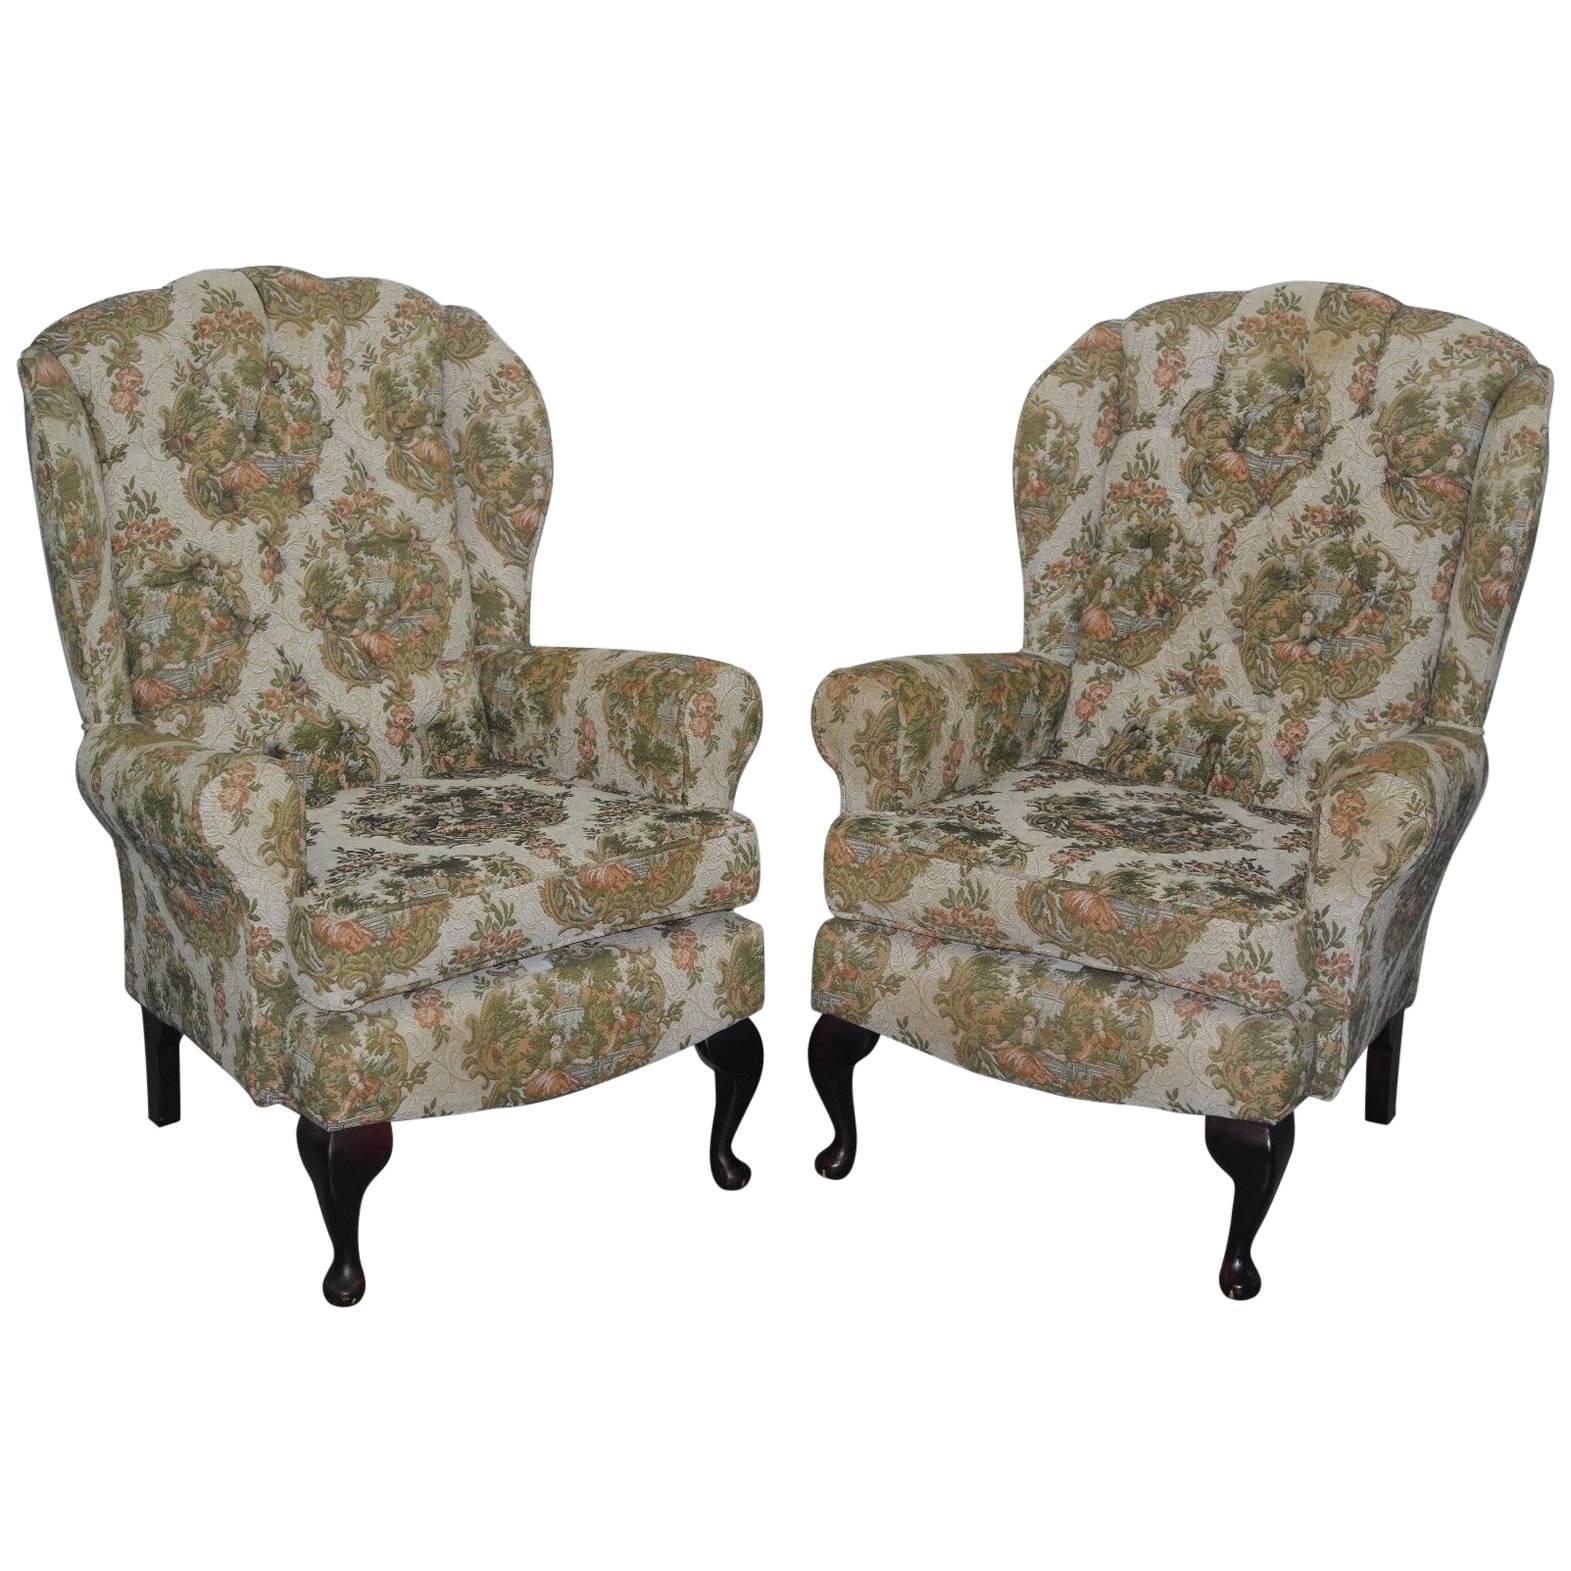 Pair of Embroidered Needlework Upholstered Chesterfield Wingback Armchairs